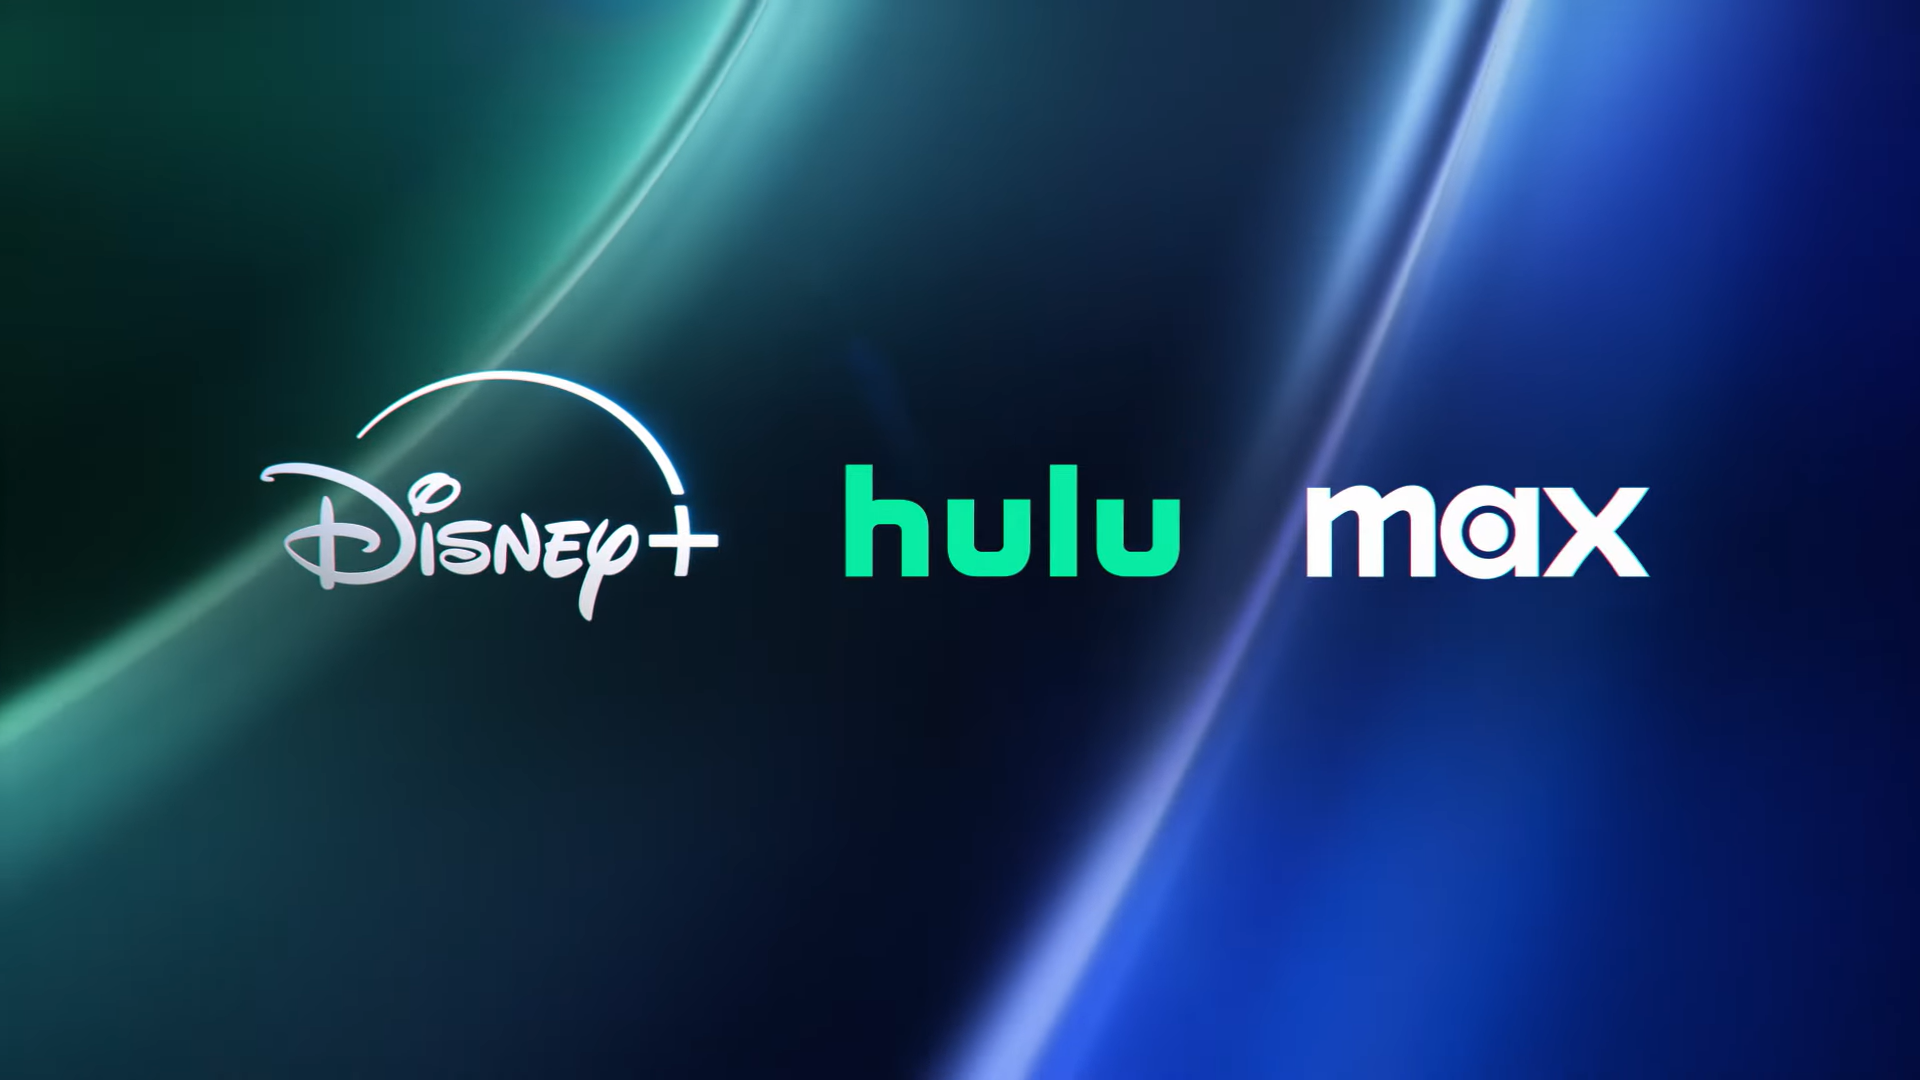 Disney+, Max and Hulu Bundle Is Now Released, Including Ad-Free And Ad-Supported Plans For Users